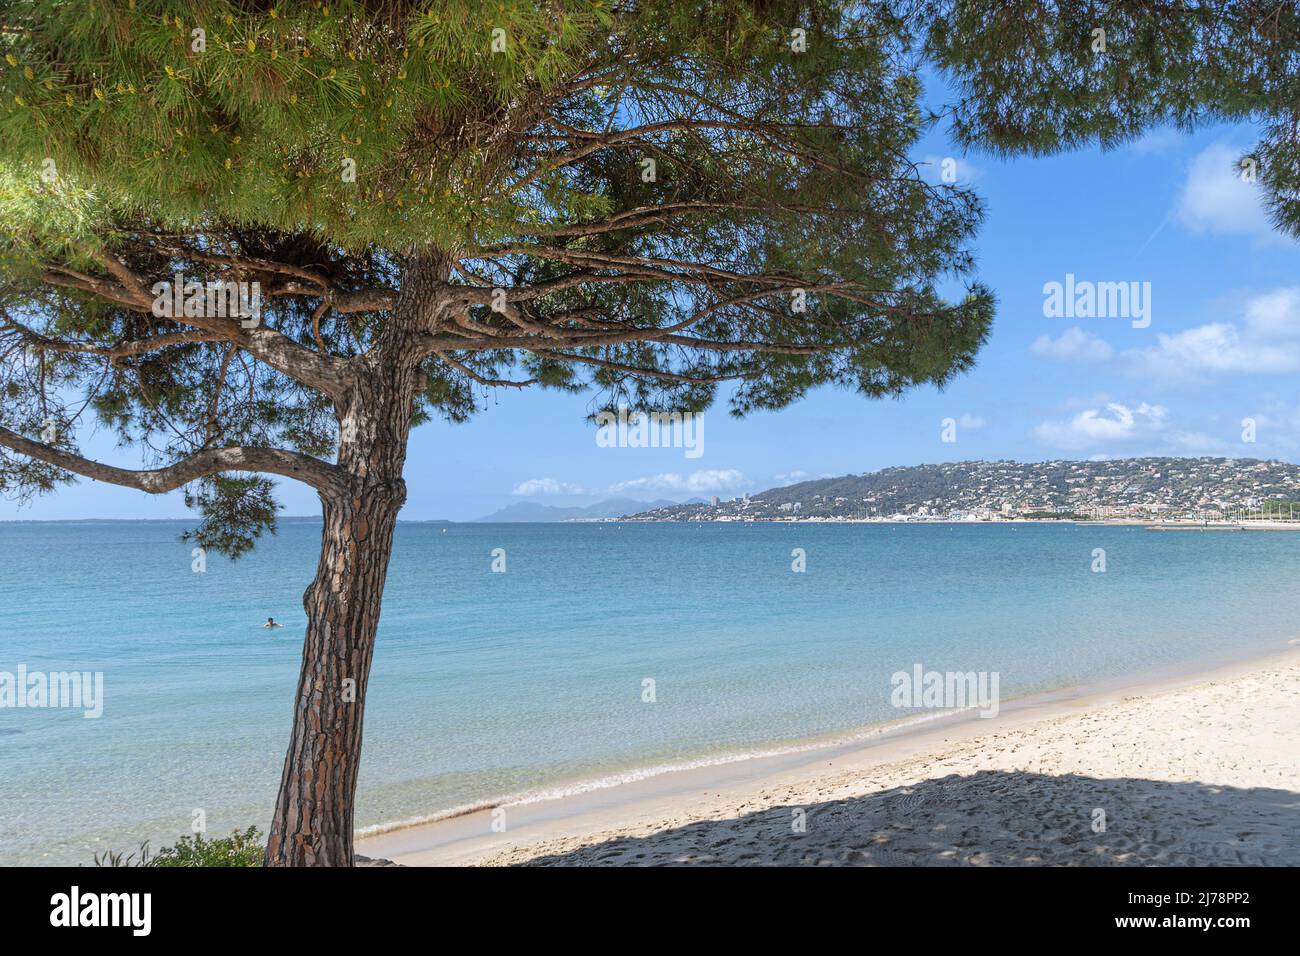 The beach at juan Les Pins on the Cote d'Azur Stock Photo